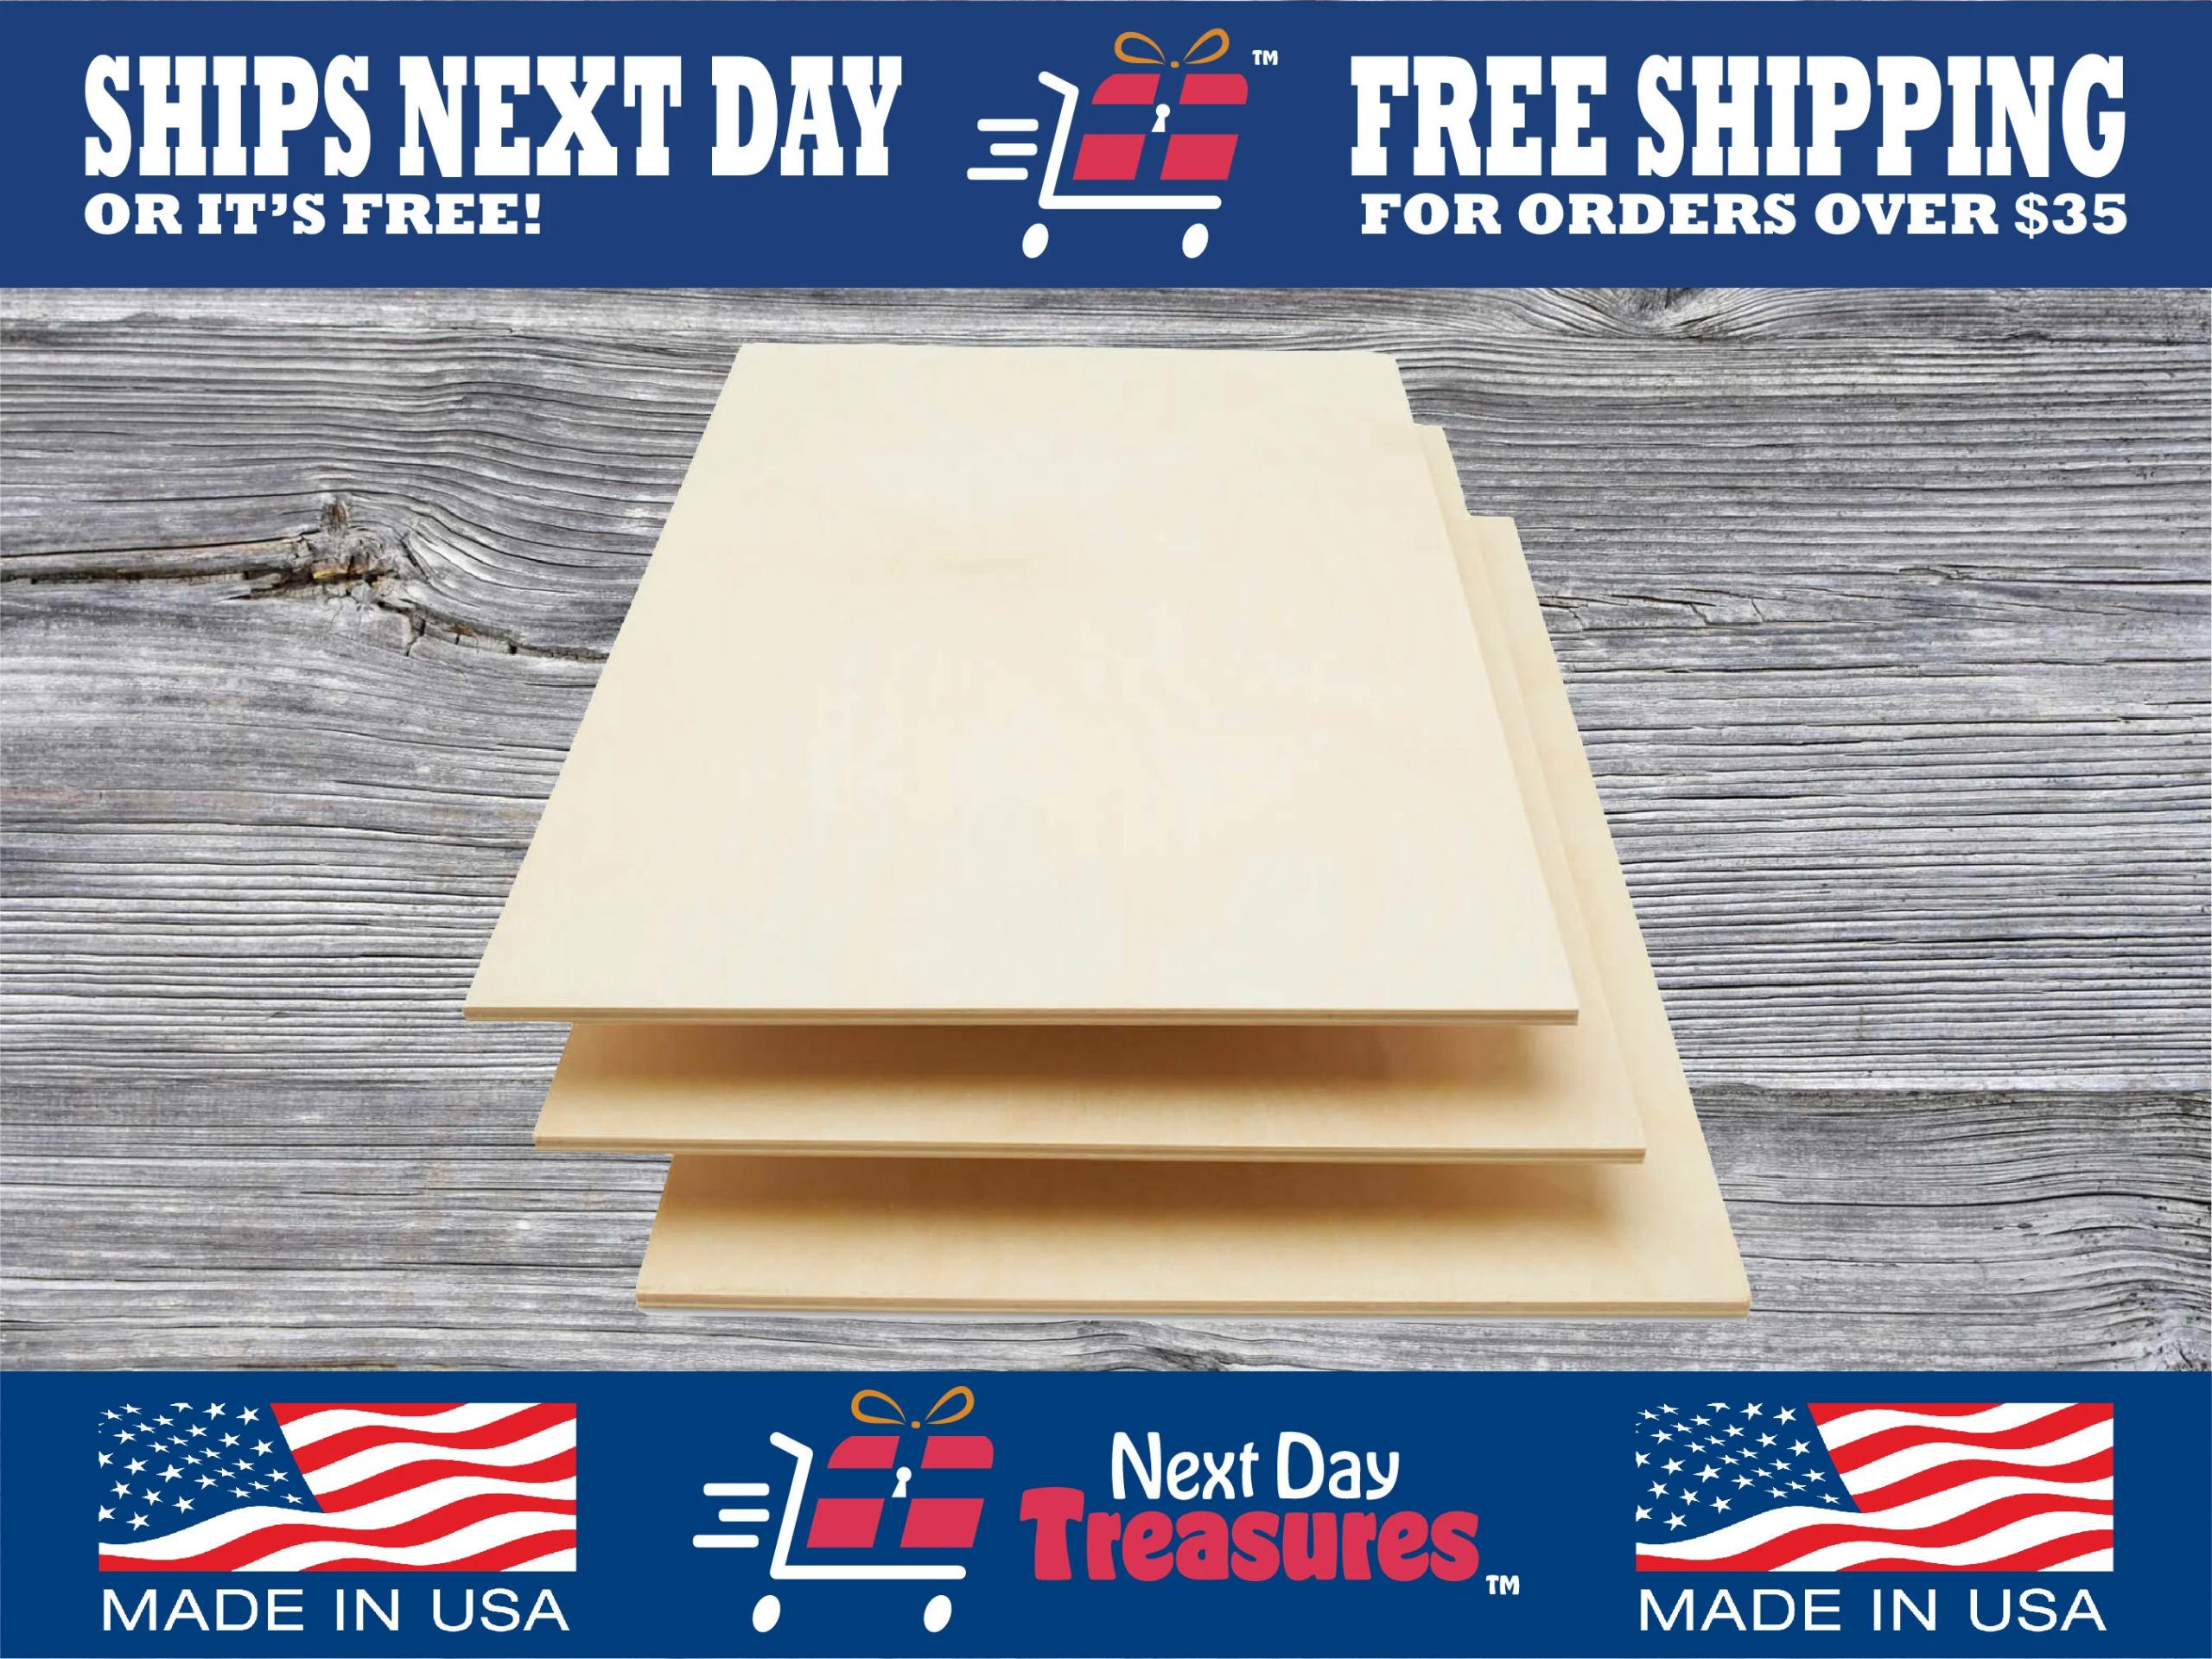 3MM 1/8 x 12 x 20 Baltic Birch Plywood - B/BB Grade (6pk) Ready for  Glowforge Laser Printers - Perfect for Arts and Crafts, School Projects and  DIY